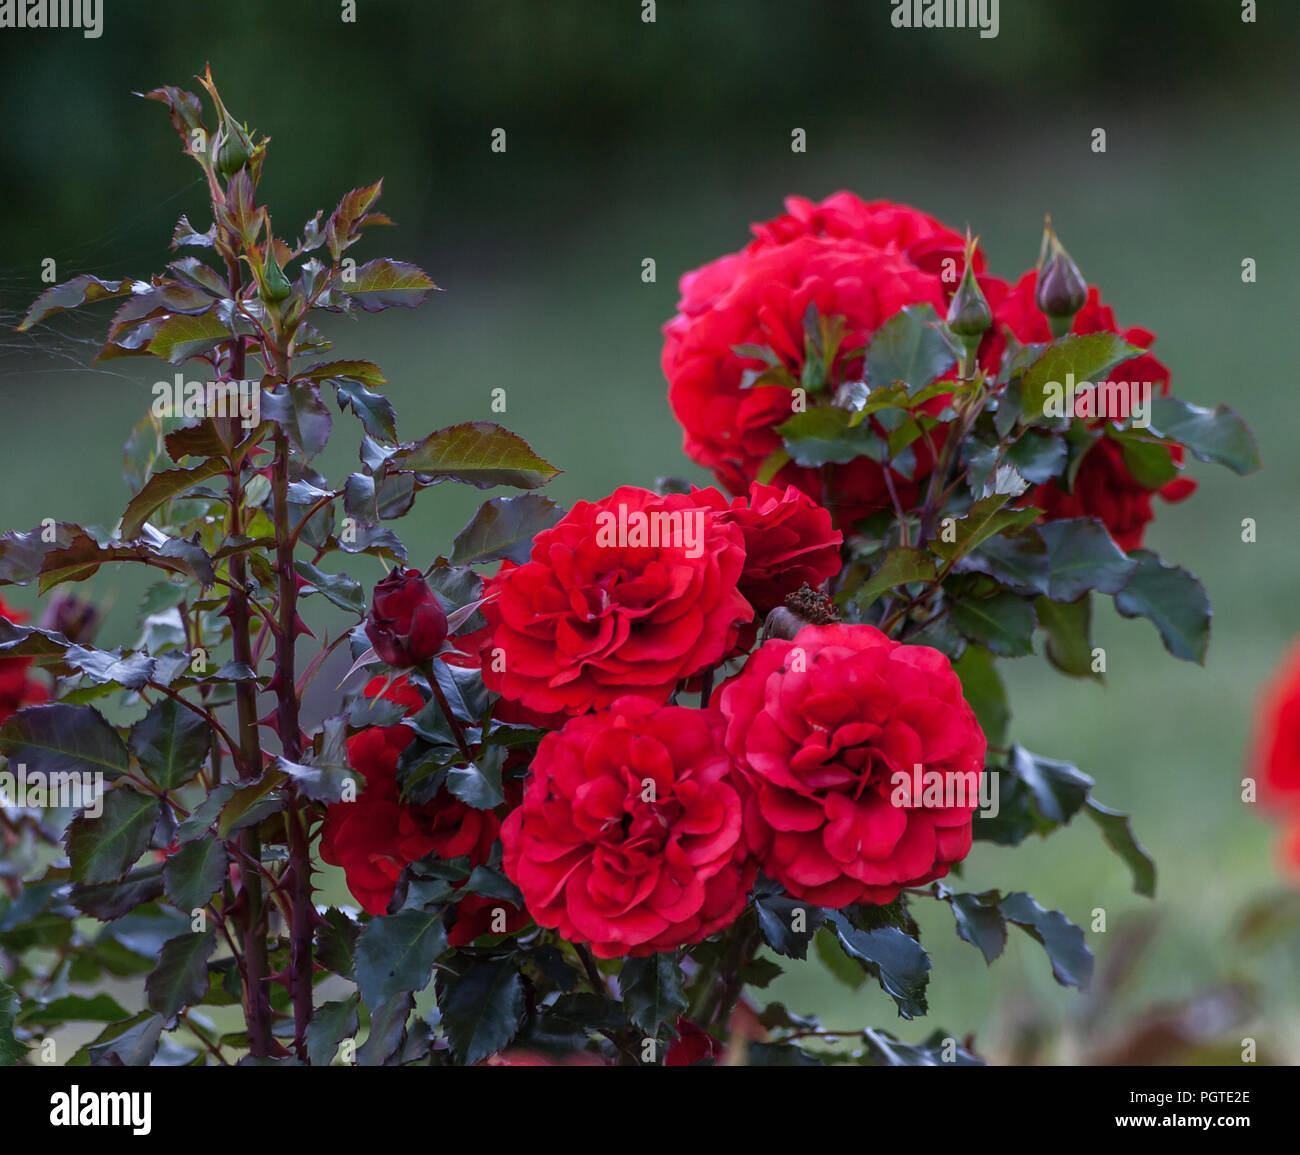 rose remembrance bunch of large bright red flowers in full bloom in the photo, growing in the garden, bright green leaves and beautiful flowers, Stock Photo